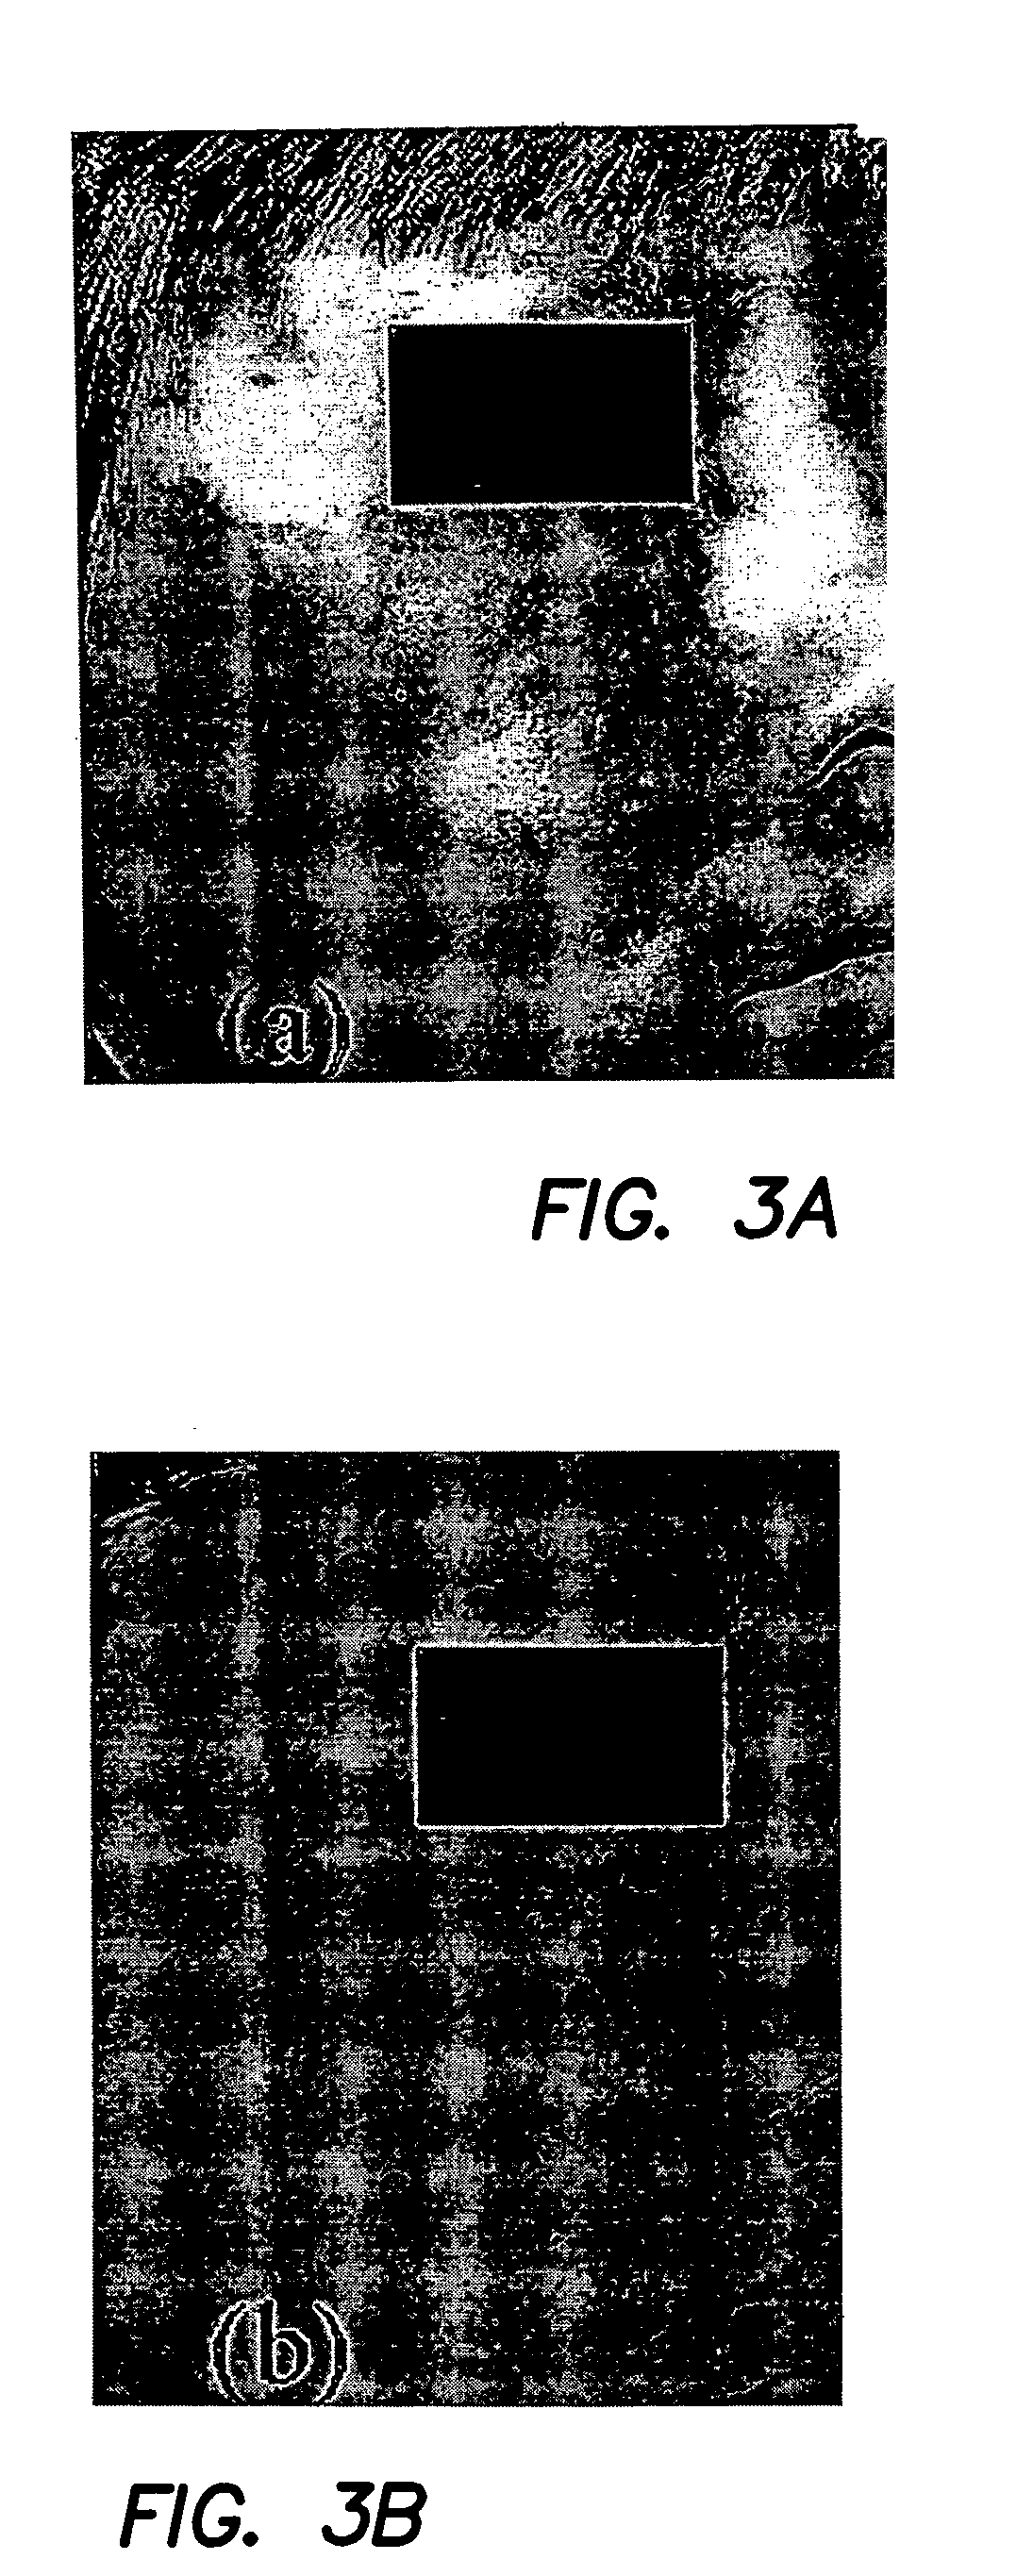 Method and apparatus for characterization of chromophore content and distribution in skin using cross-polarized diffuse reflectance imaging